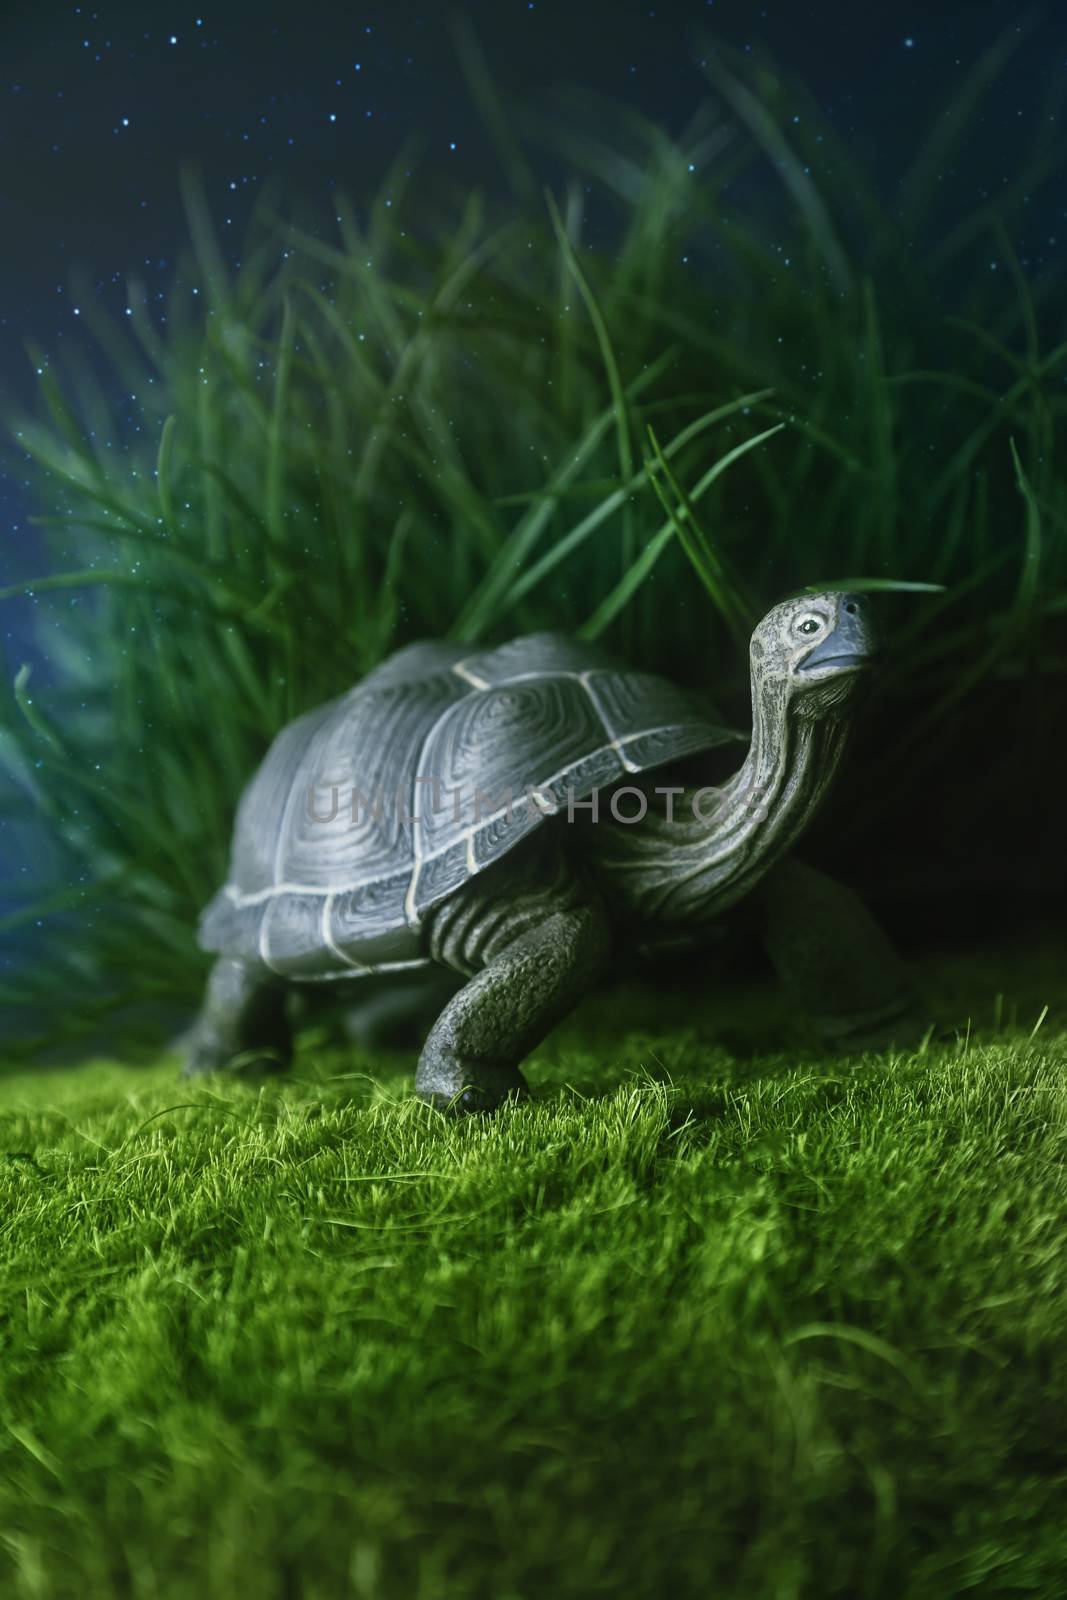 Toy turtle walking on grass by Sandralise